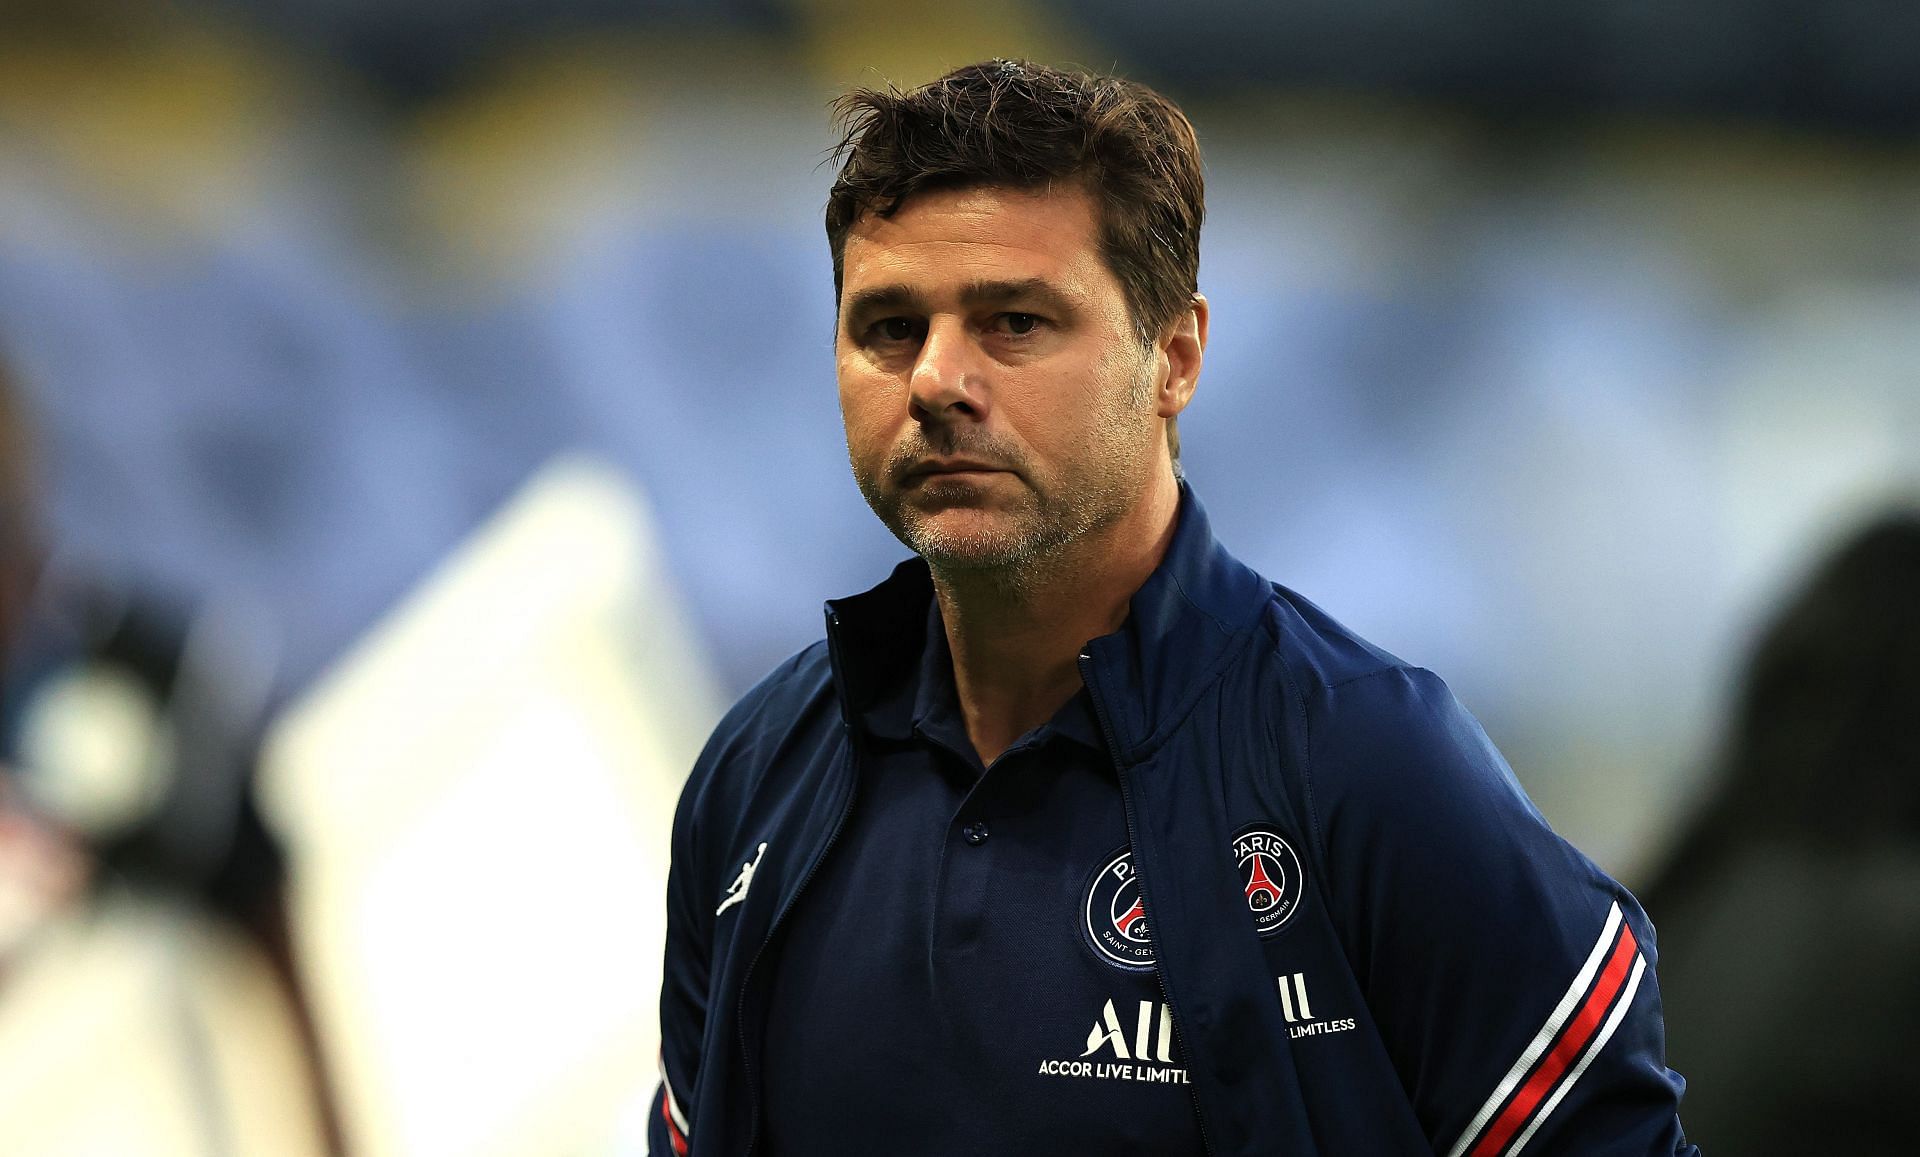 PSG are contemplating manager Mauricio Pochettino&rsquo;s exit at the end of the current season.